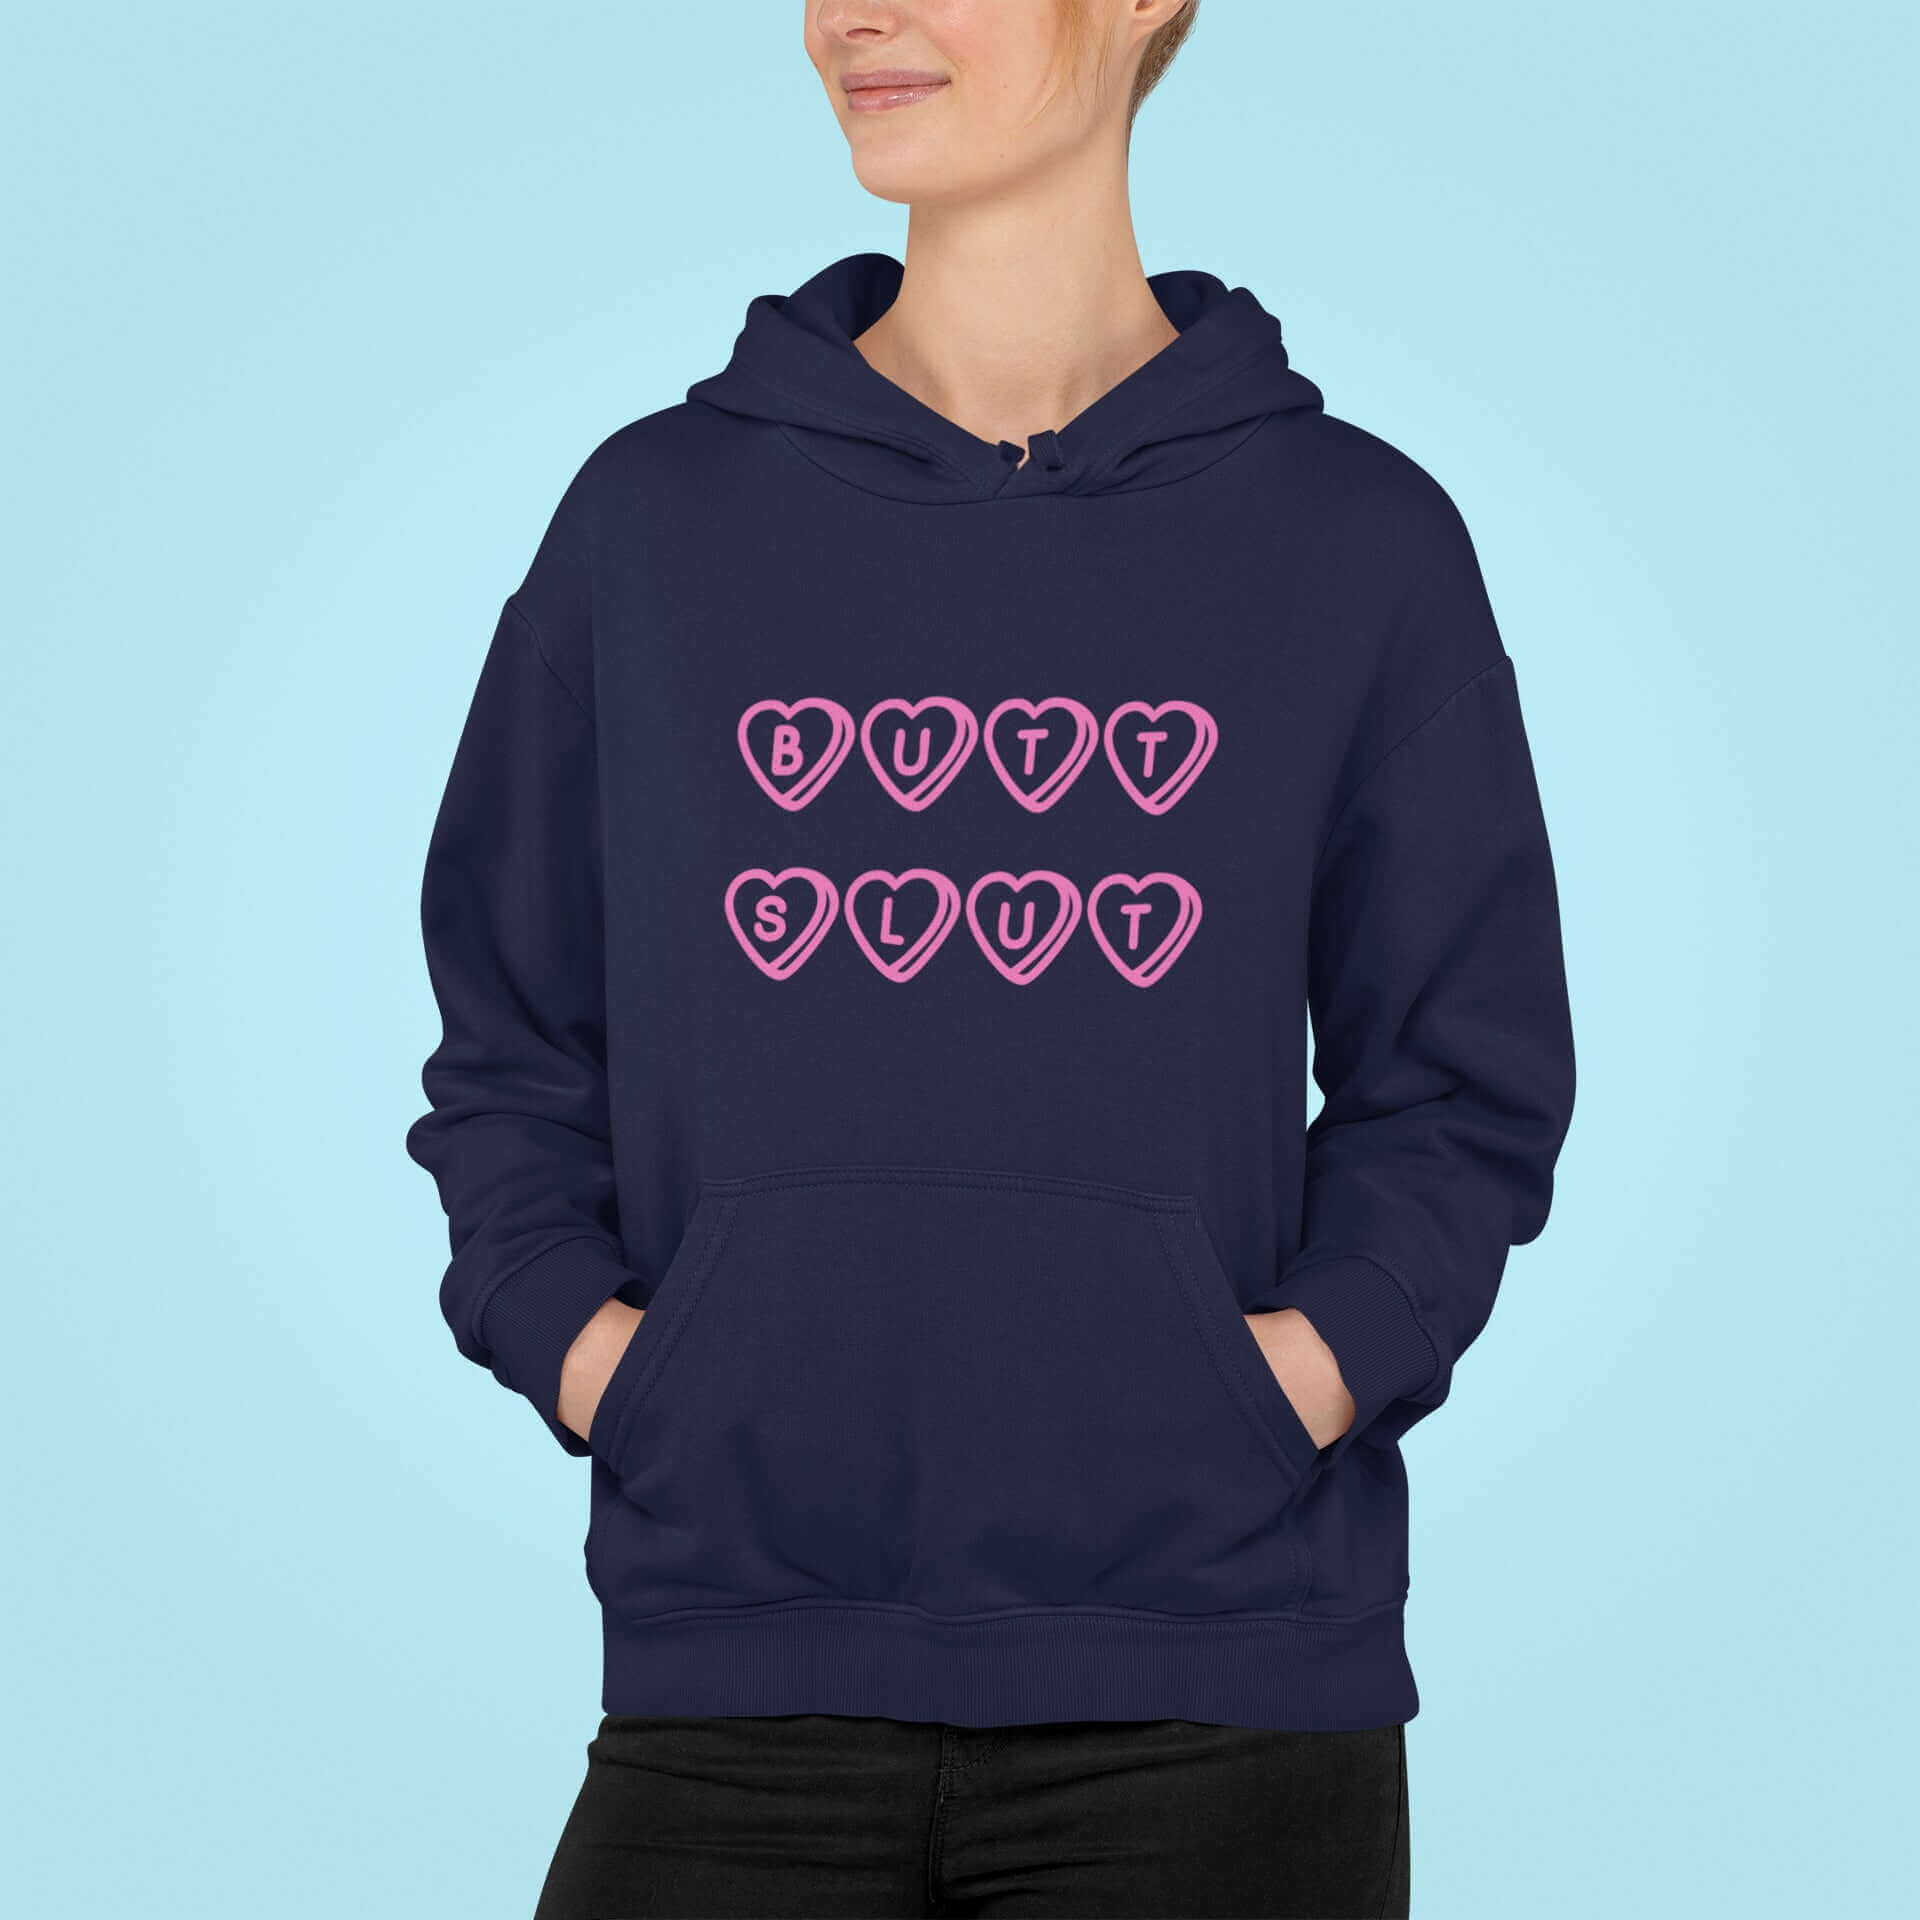 Woman wearing navy blue hoodie sweatshirt with the words Butt Slut printed in pink on the front. Pink hearts are around each letter in the text.